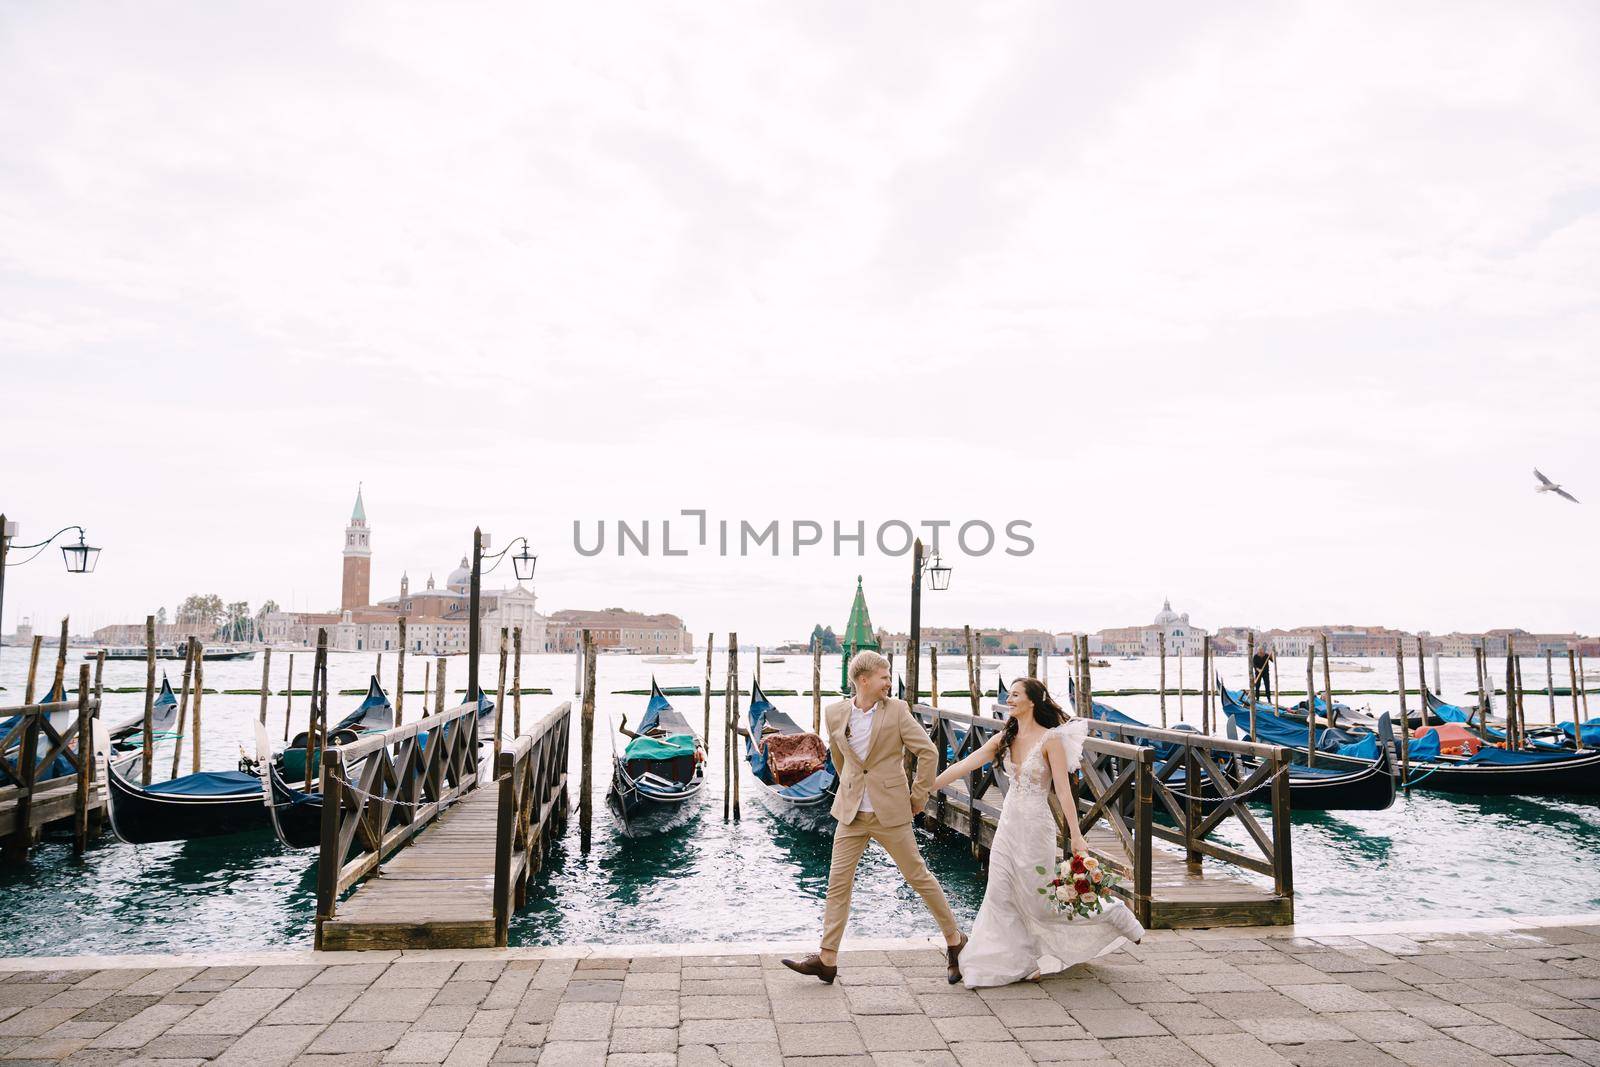 The bride and groom are run along the gondola pier, holding hand in Venice, near Piazza San Marco, overlooking San Giorgio Maggiore and the sunset sky. The largest gondola pier in Venice, Italy. by Nadtochiy